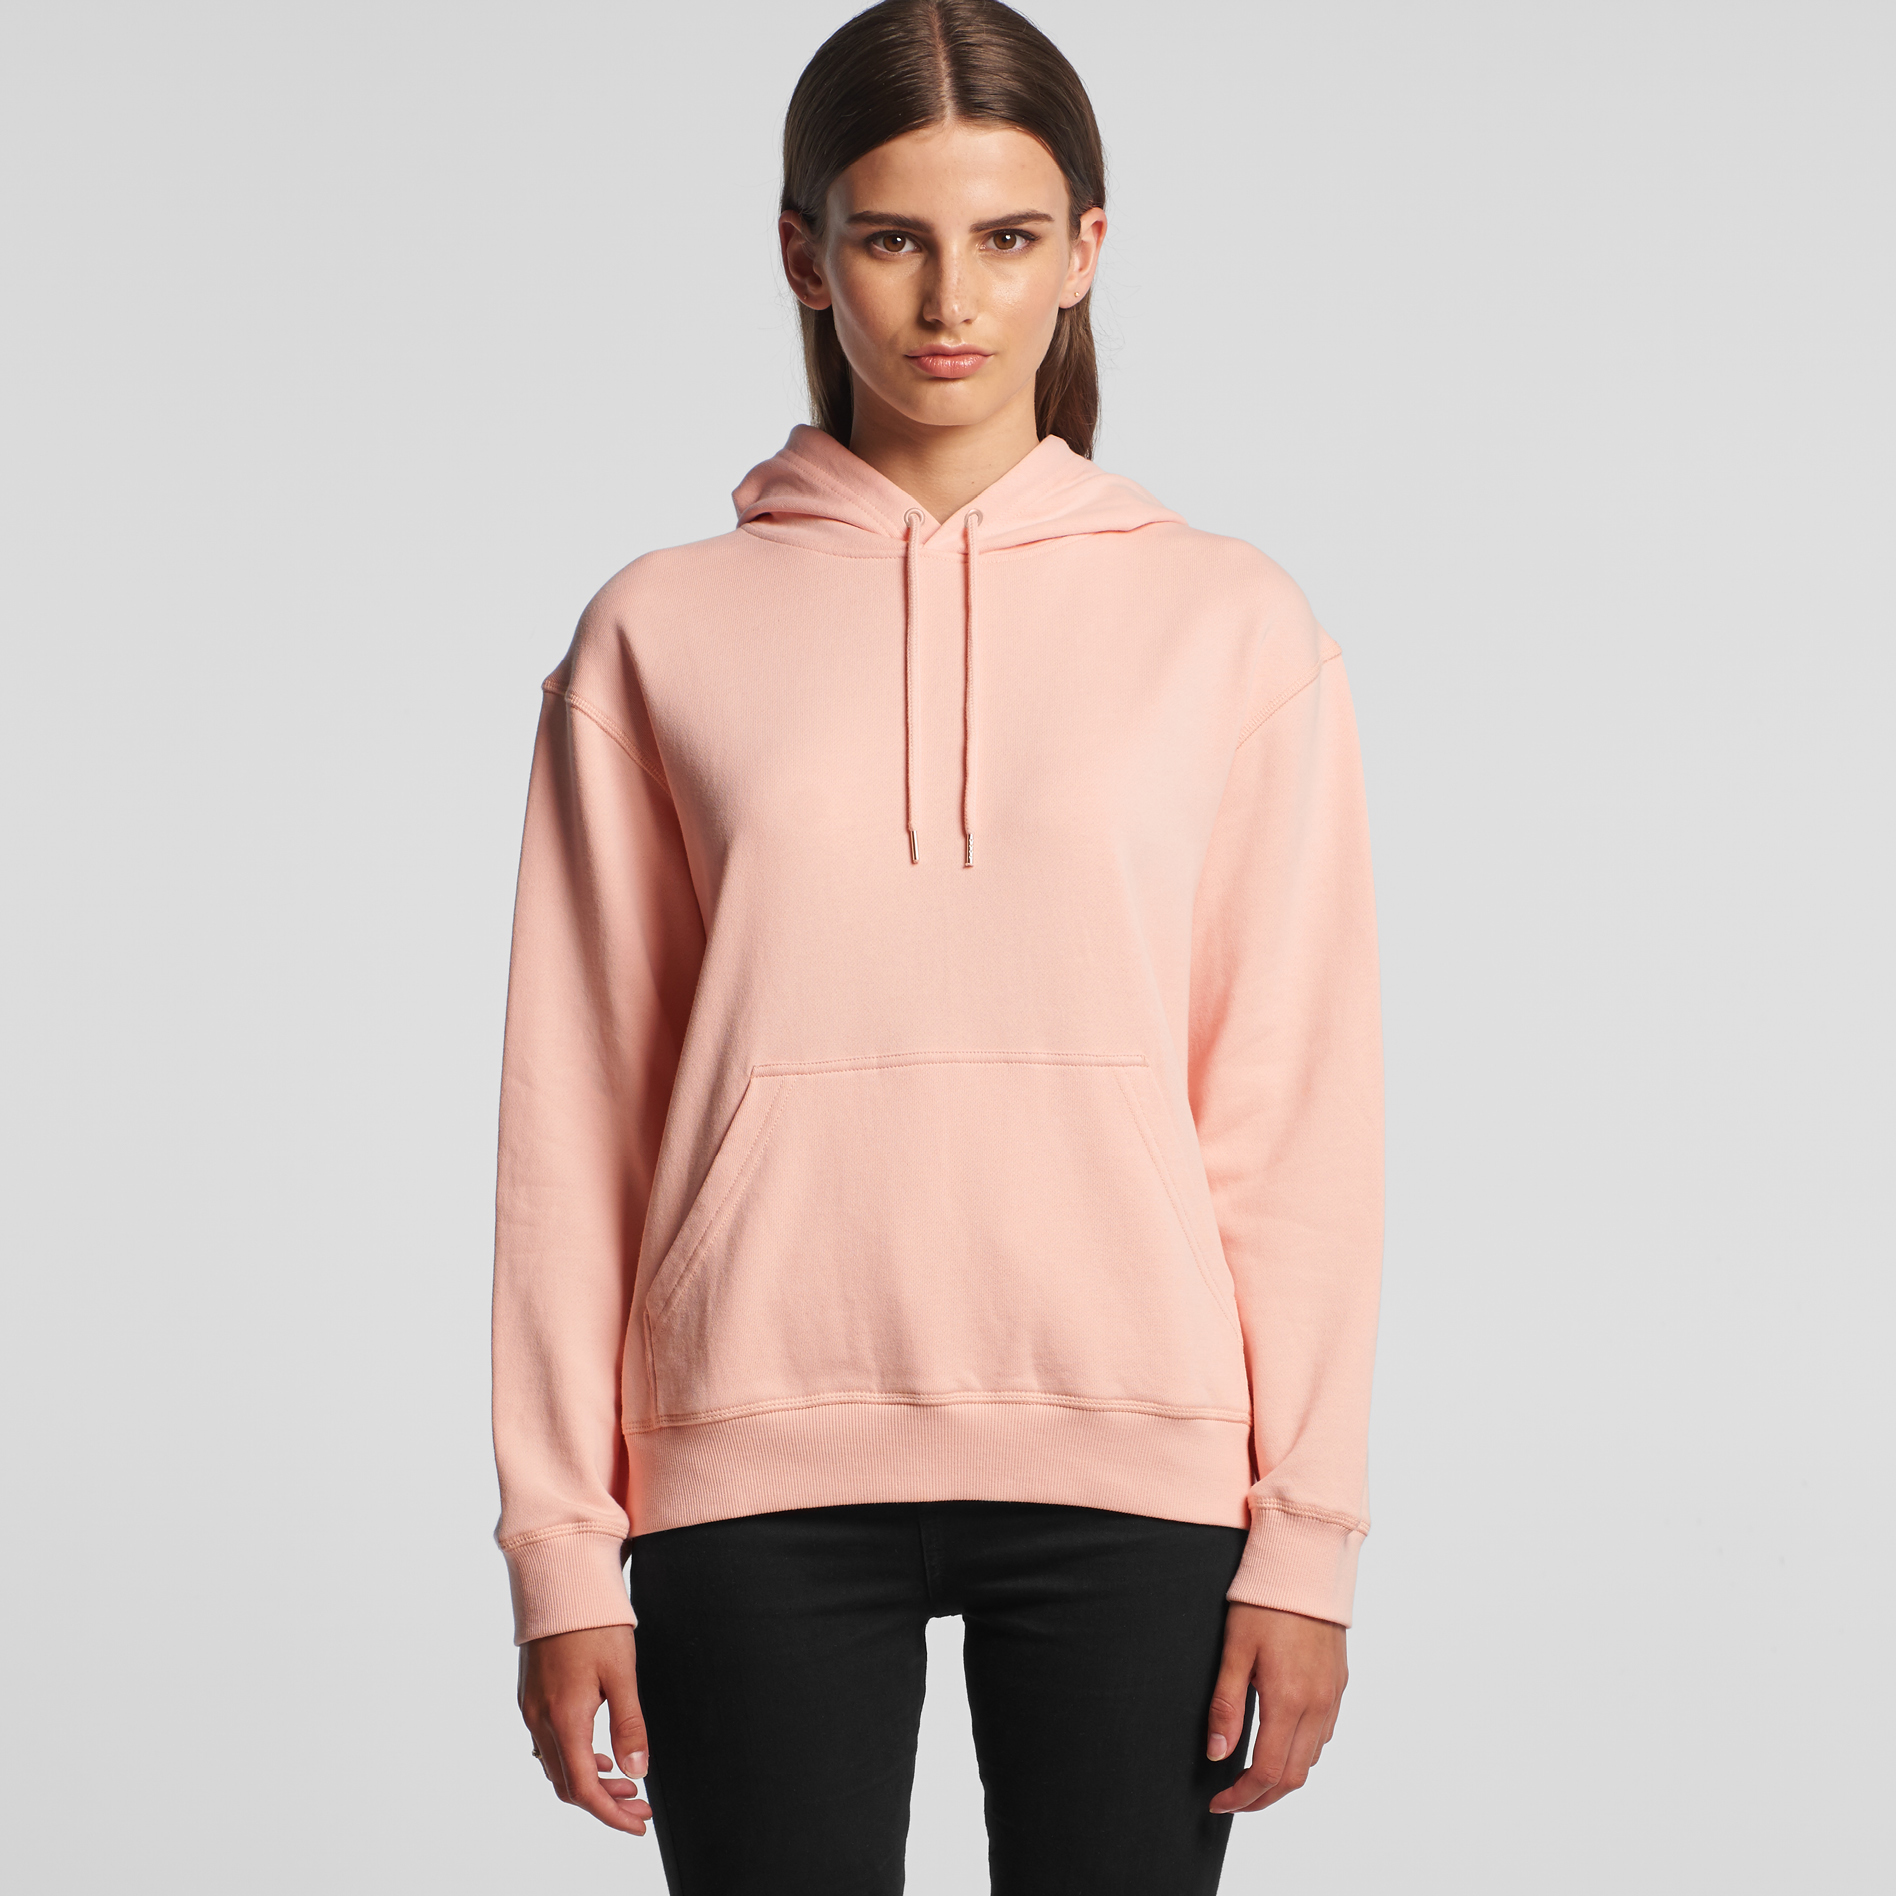 Women's Premium Hood | AS Colour | Withers and Co